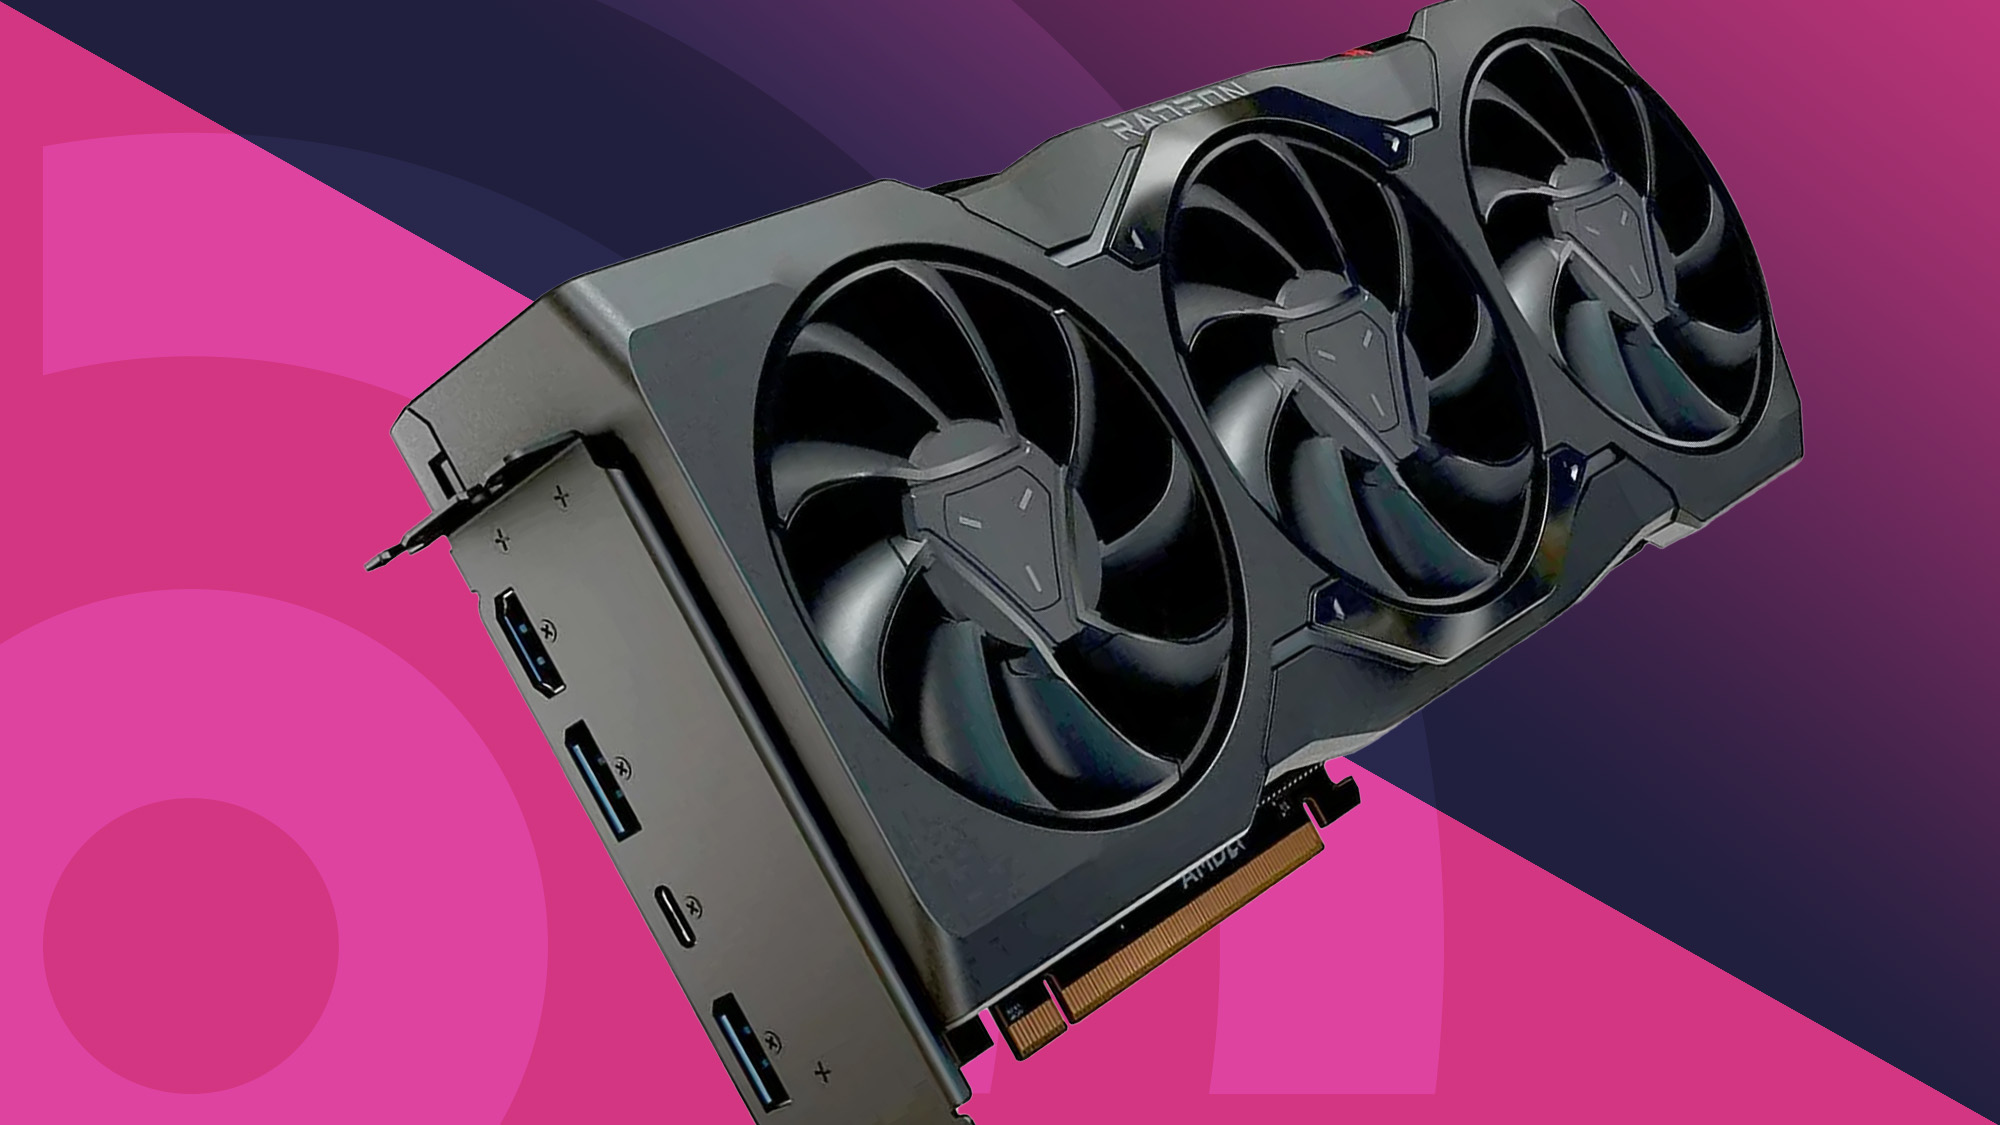 An AMD Radeon RX 7900 XT, a top pick for best graphics card, against a two tone magenta background